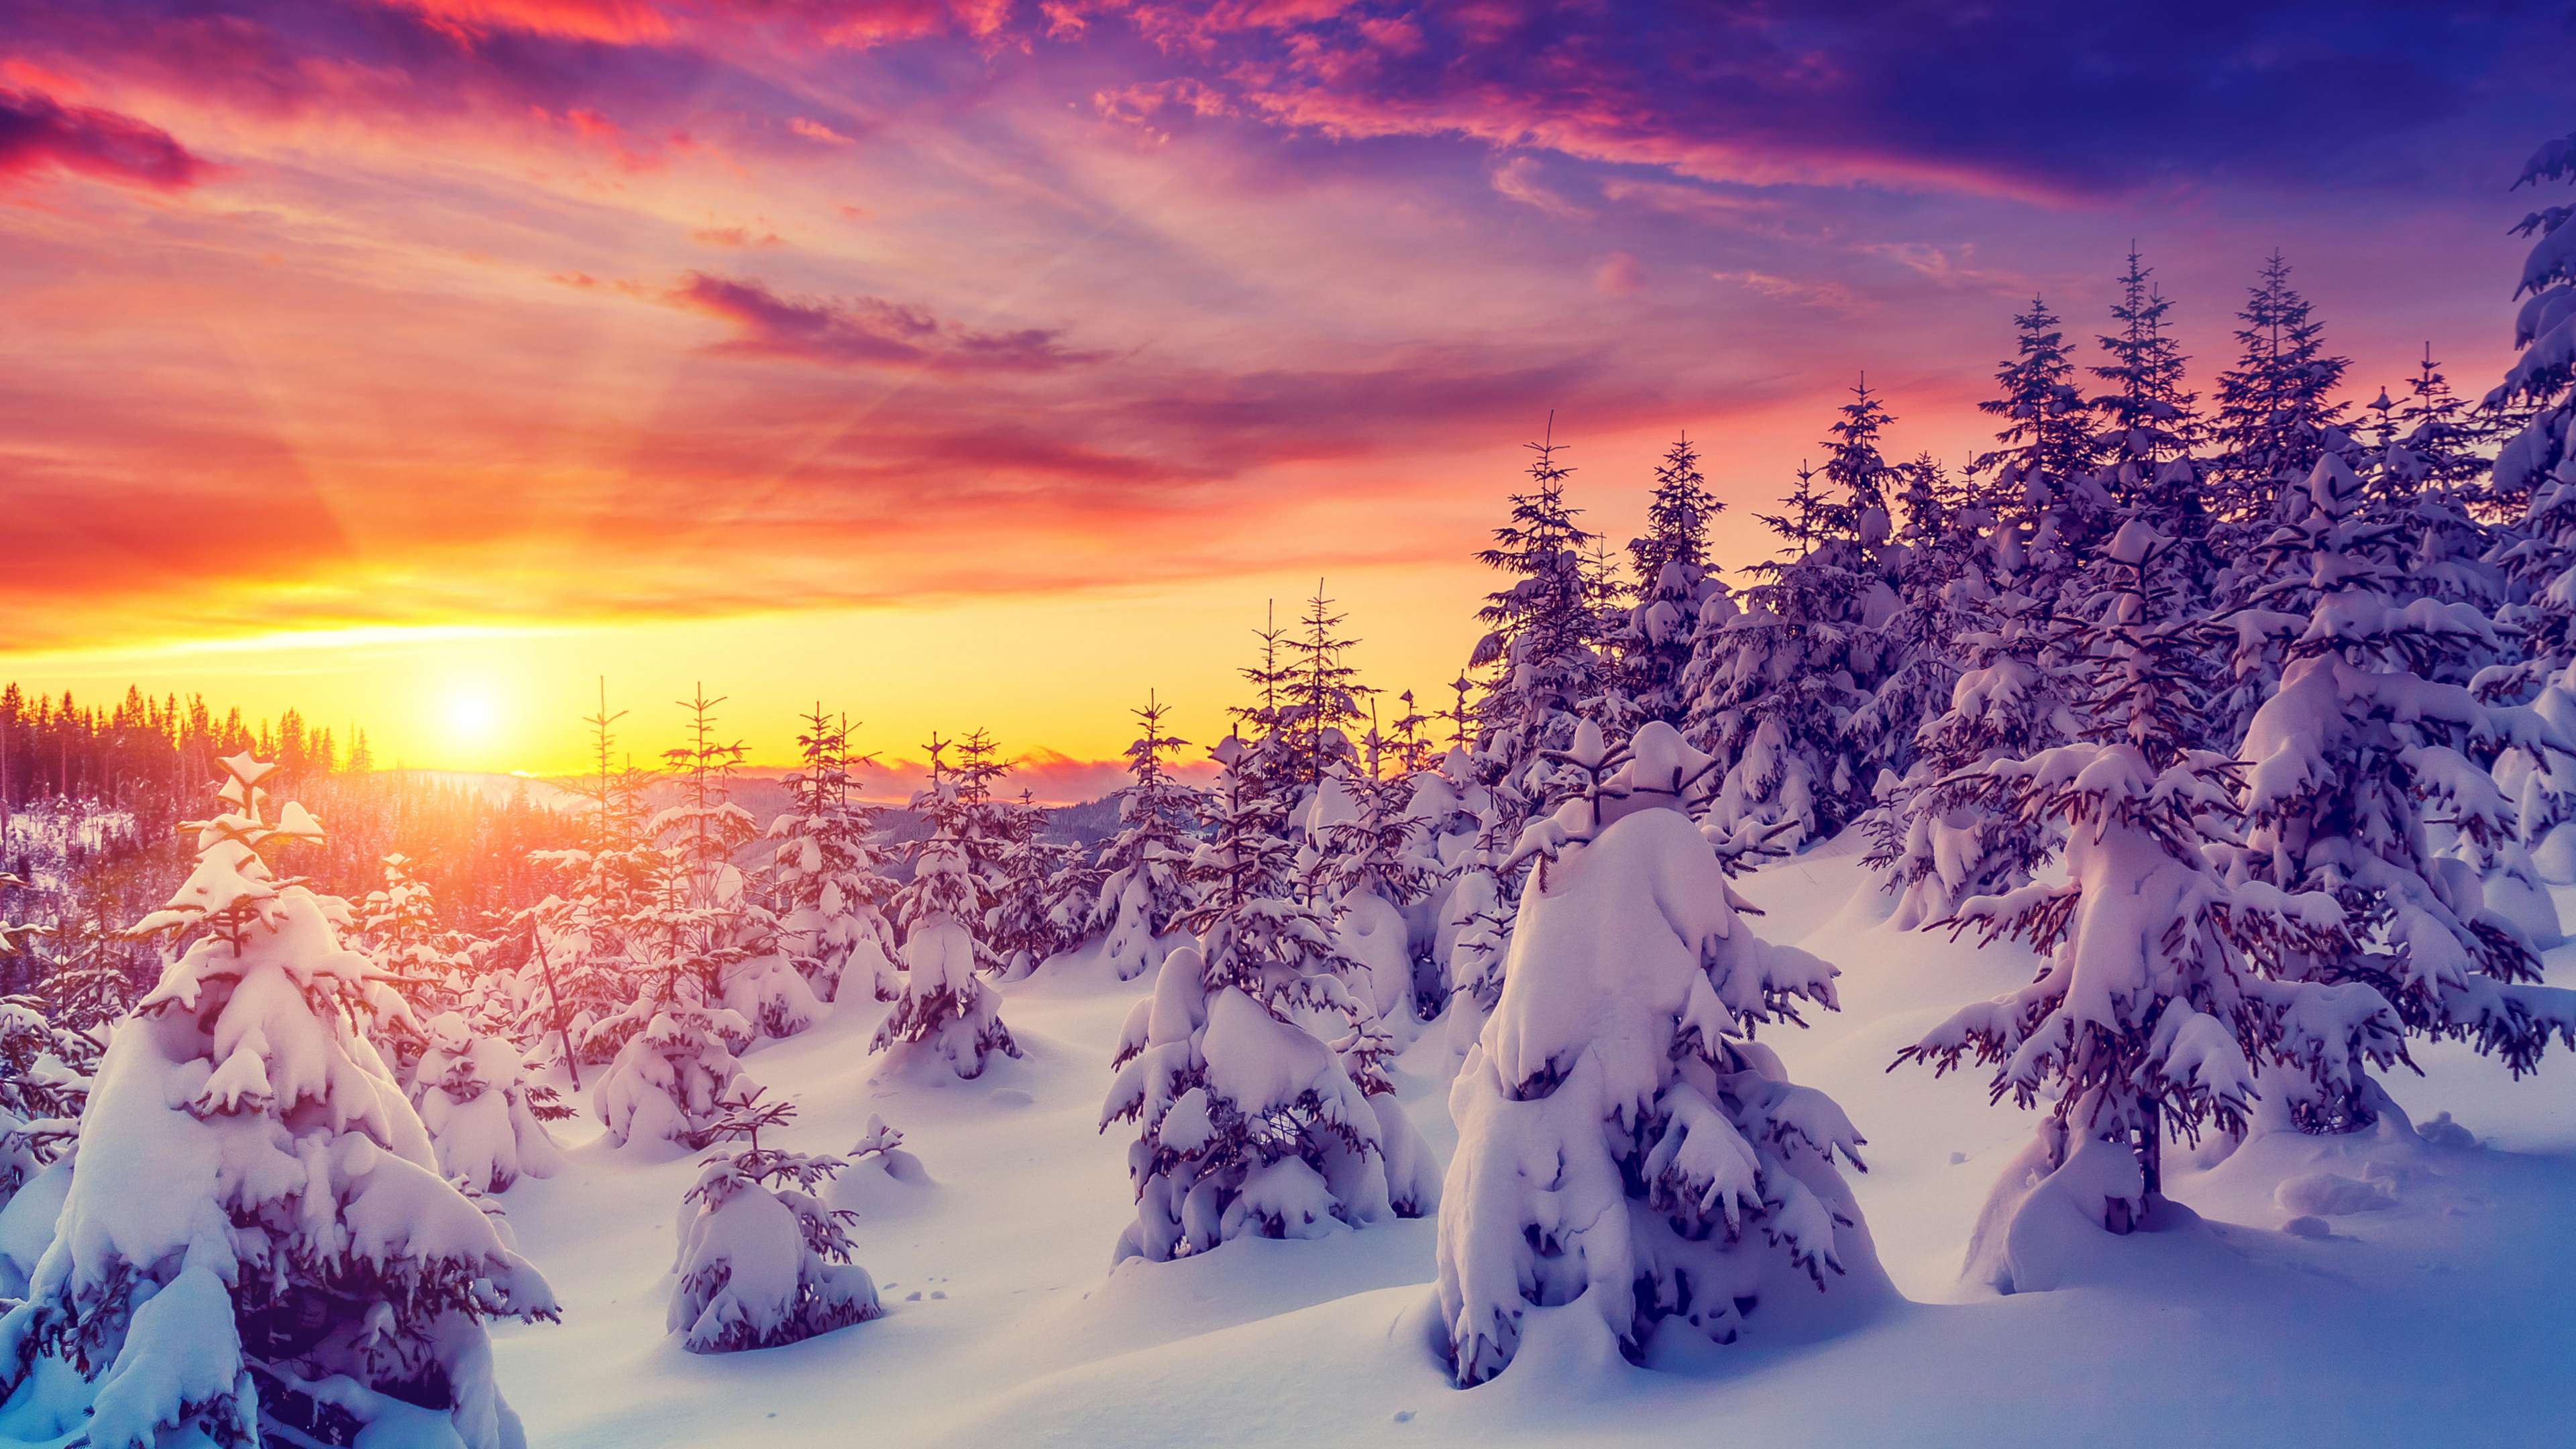 Snow Covered Trees During Sunset. Wallpaper in 3840x2160 Resolution